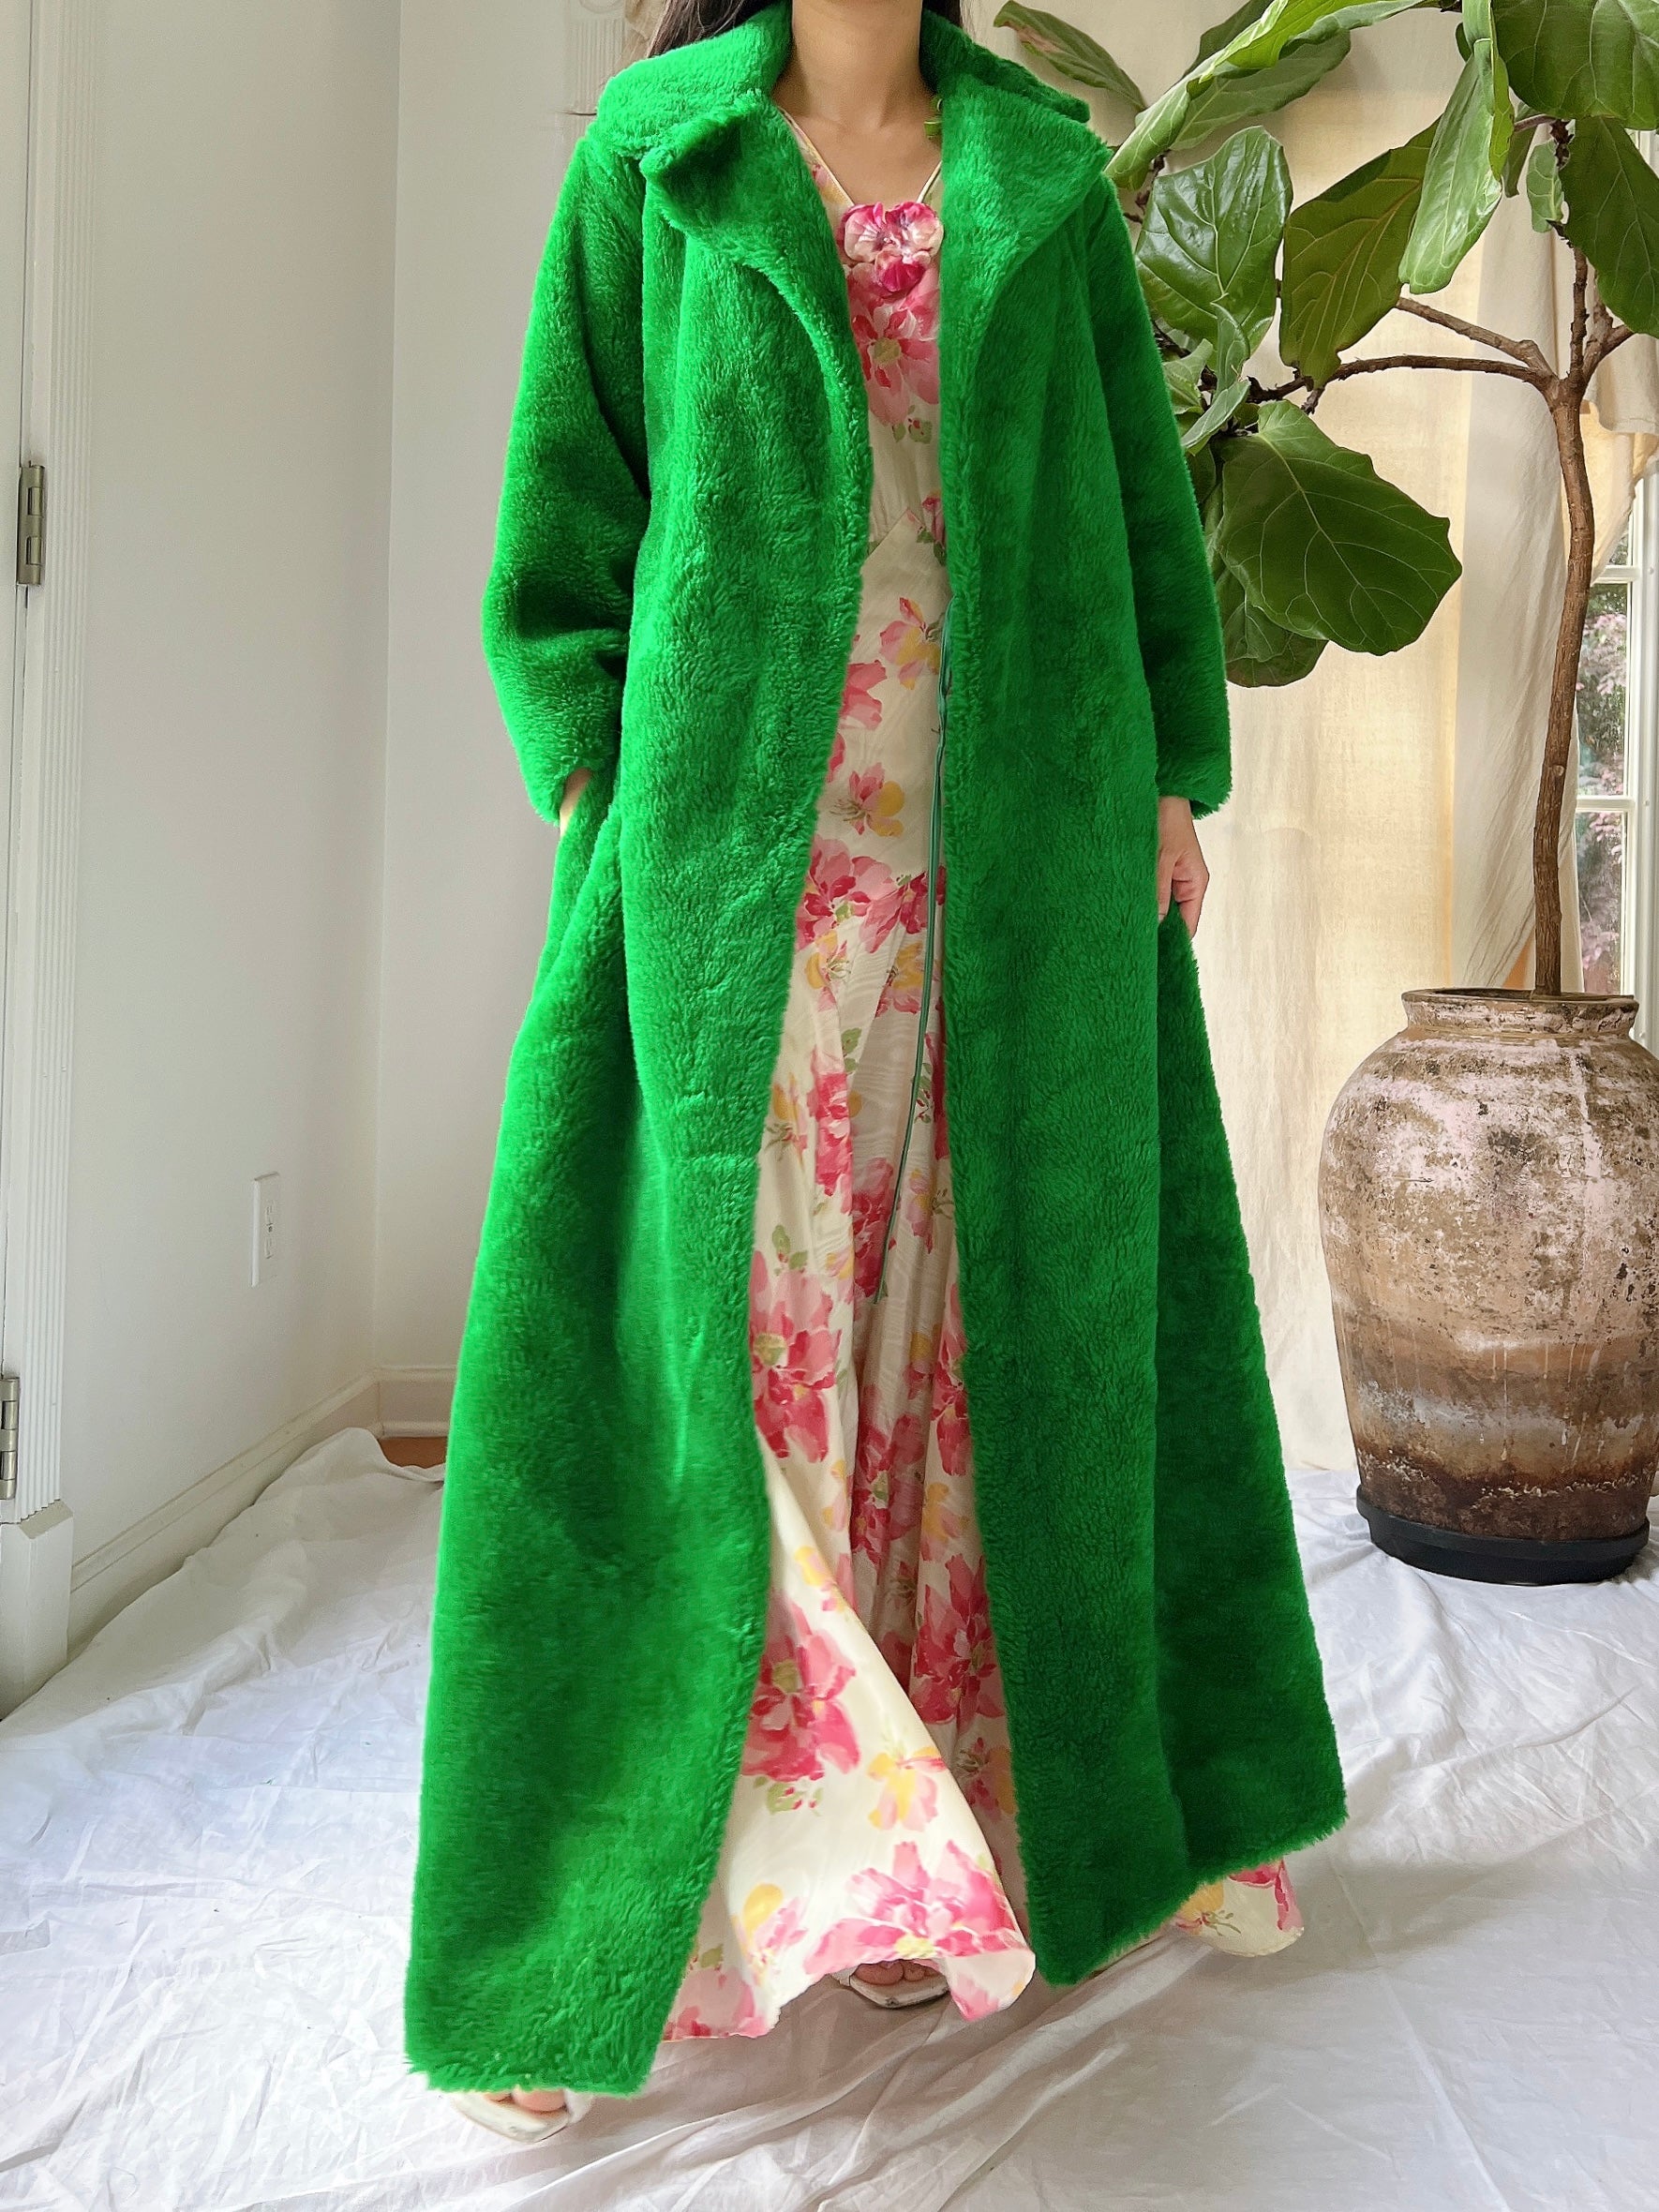 Vintage Green Acrylic Terrycloth Duster - M